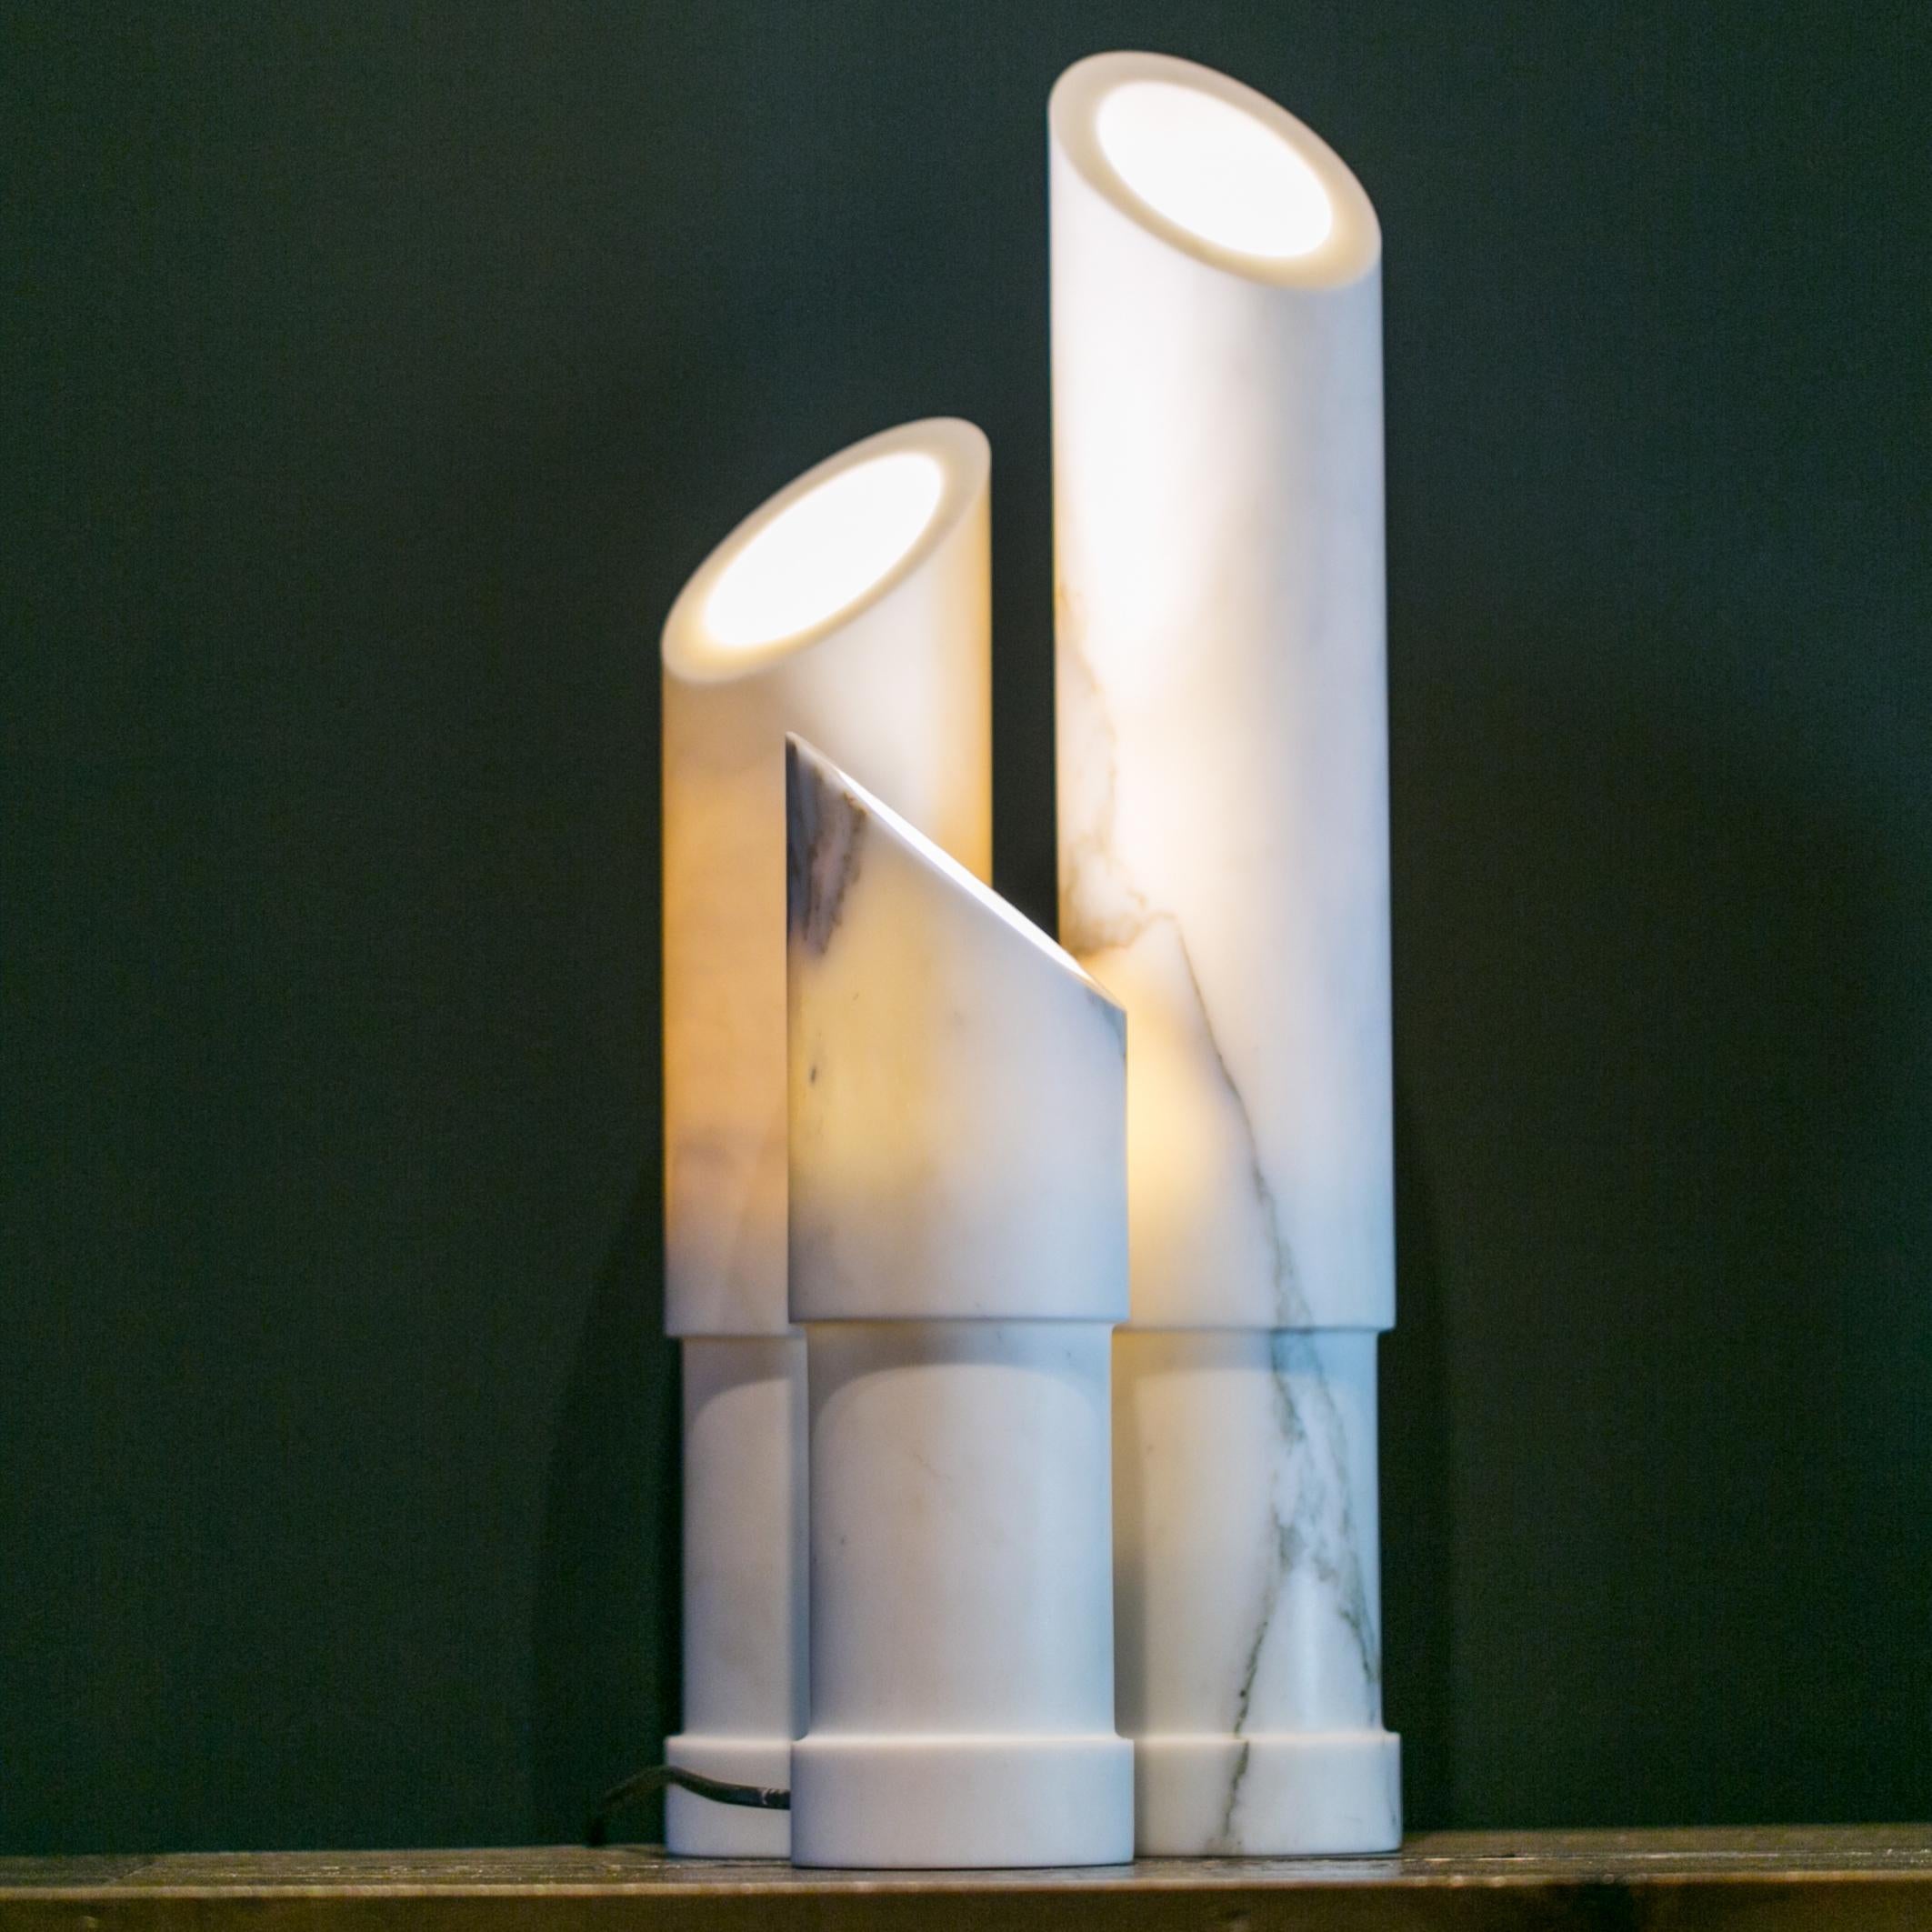 The Azoth Lamp is the latest iteration of the artist’s bamboo-inspired ensemble of marble and onyx carved objets. Evoking the morning sunlight coming through the stalks in a bamboo forest, the Azoth lamps are available as a bespoke set of lights or